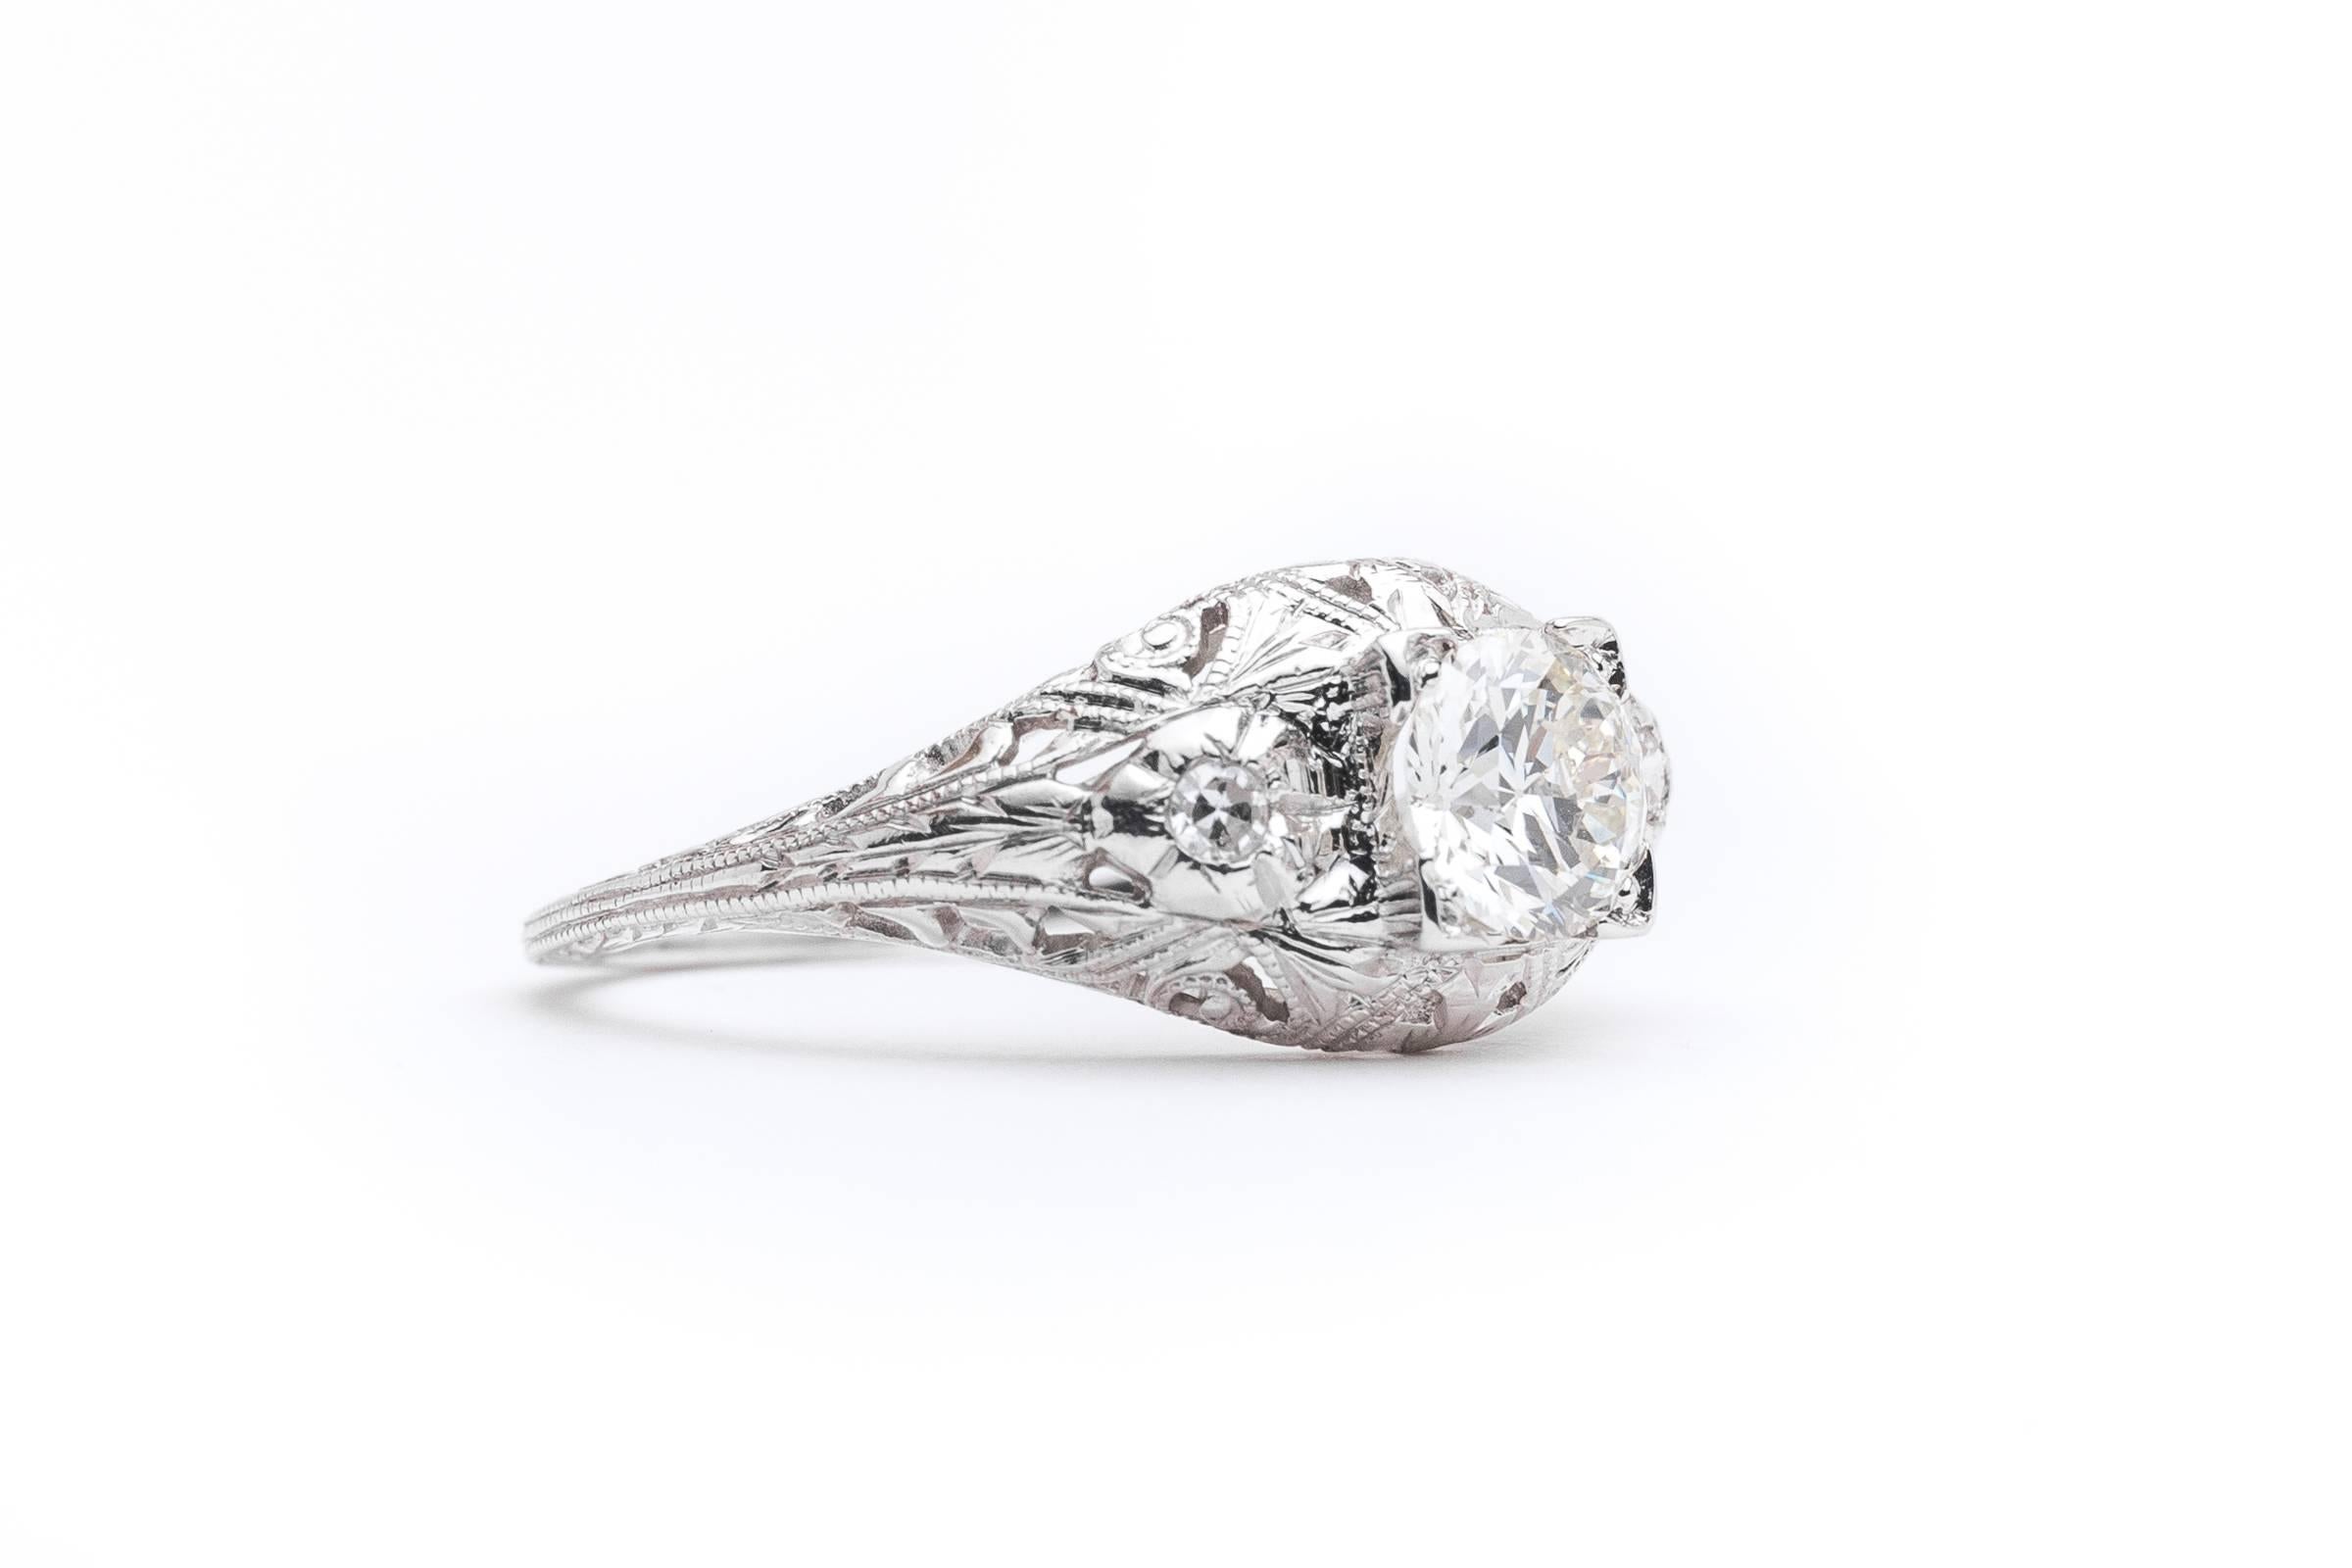 A beautiful art deco period diamond engagement ring in luxurious platinum. Featuring beautiful hand pierced filigree work and floral motif engraving throughout this engagement ring is centered by a beautiful old European cut diamond framed by a pair